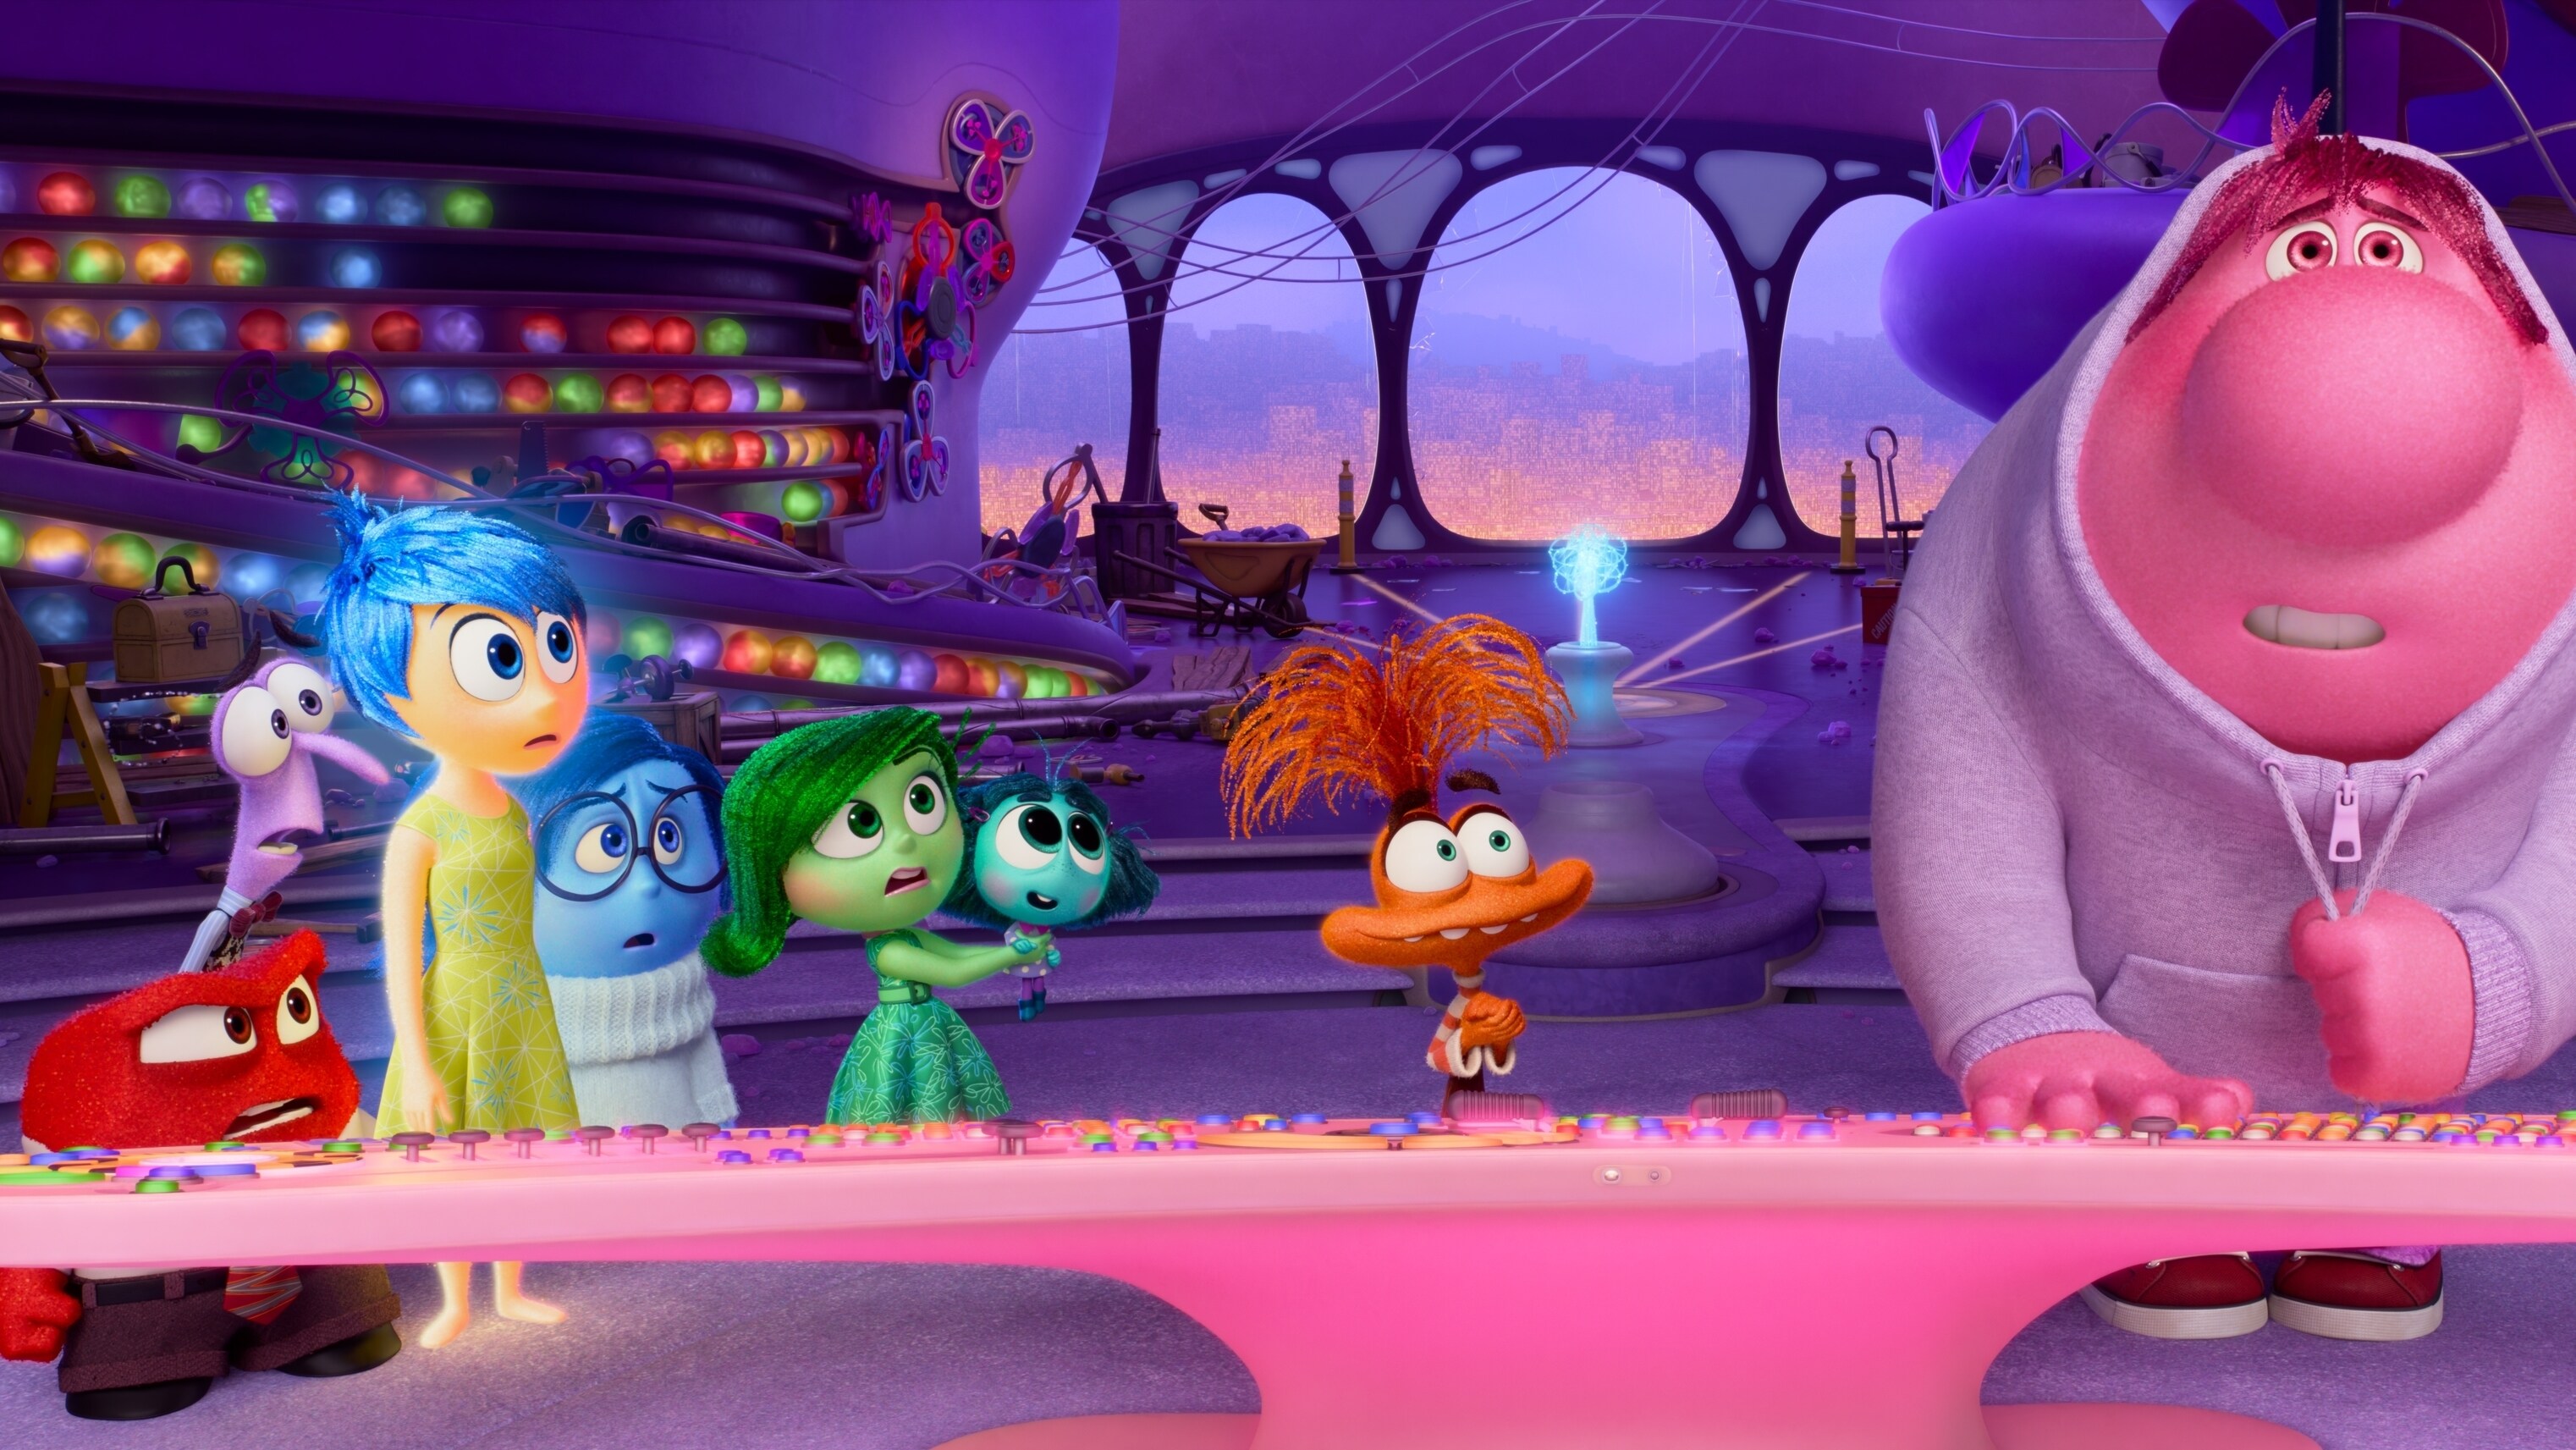 NEW TRAILER NOW AVAILABLE FOR DISNEY AND PIXAR’S INSIDE OUT 2